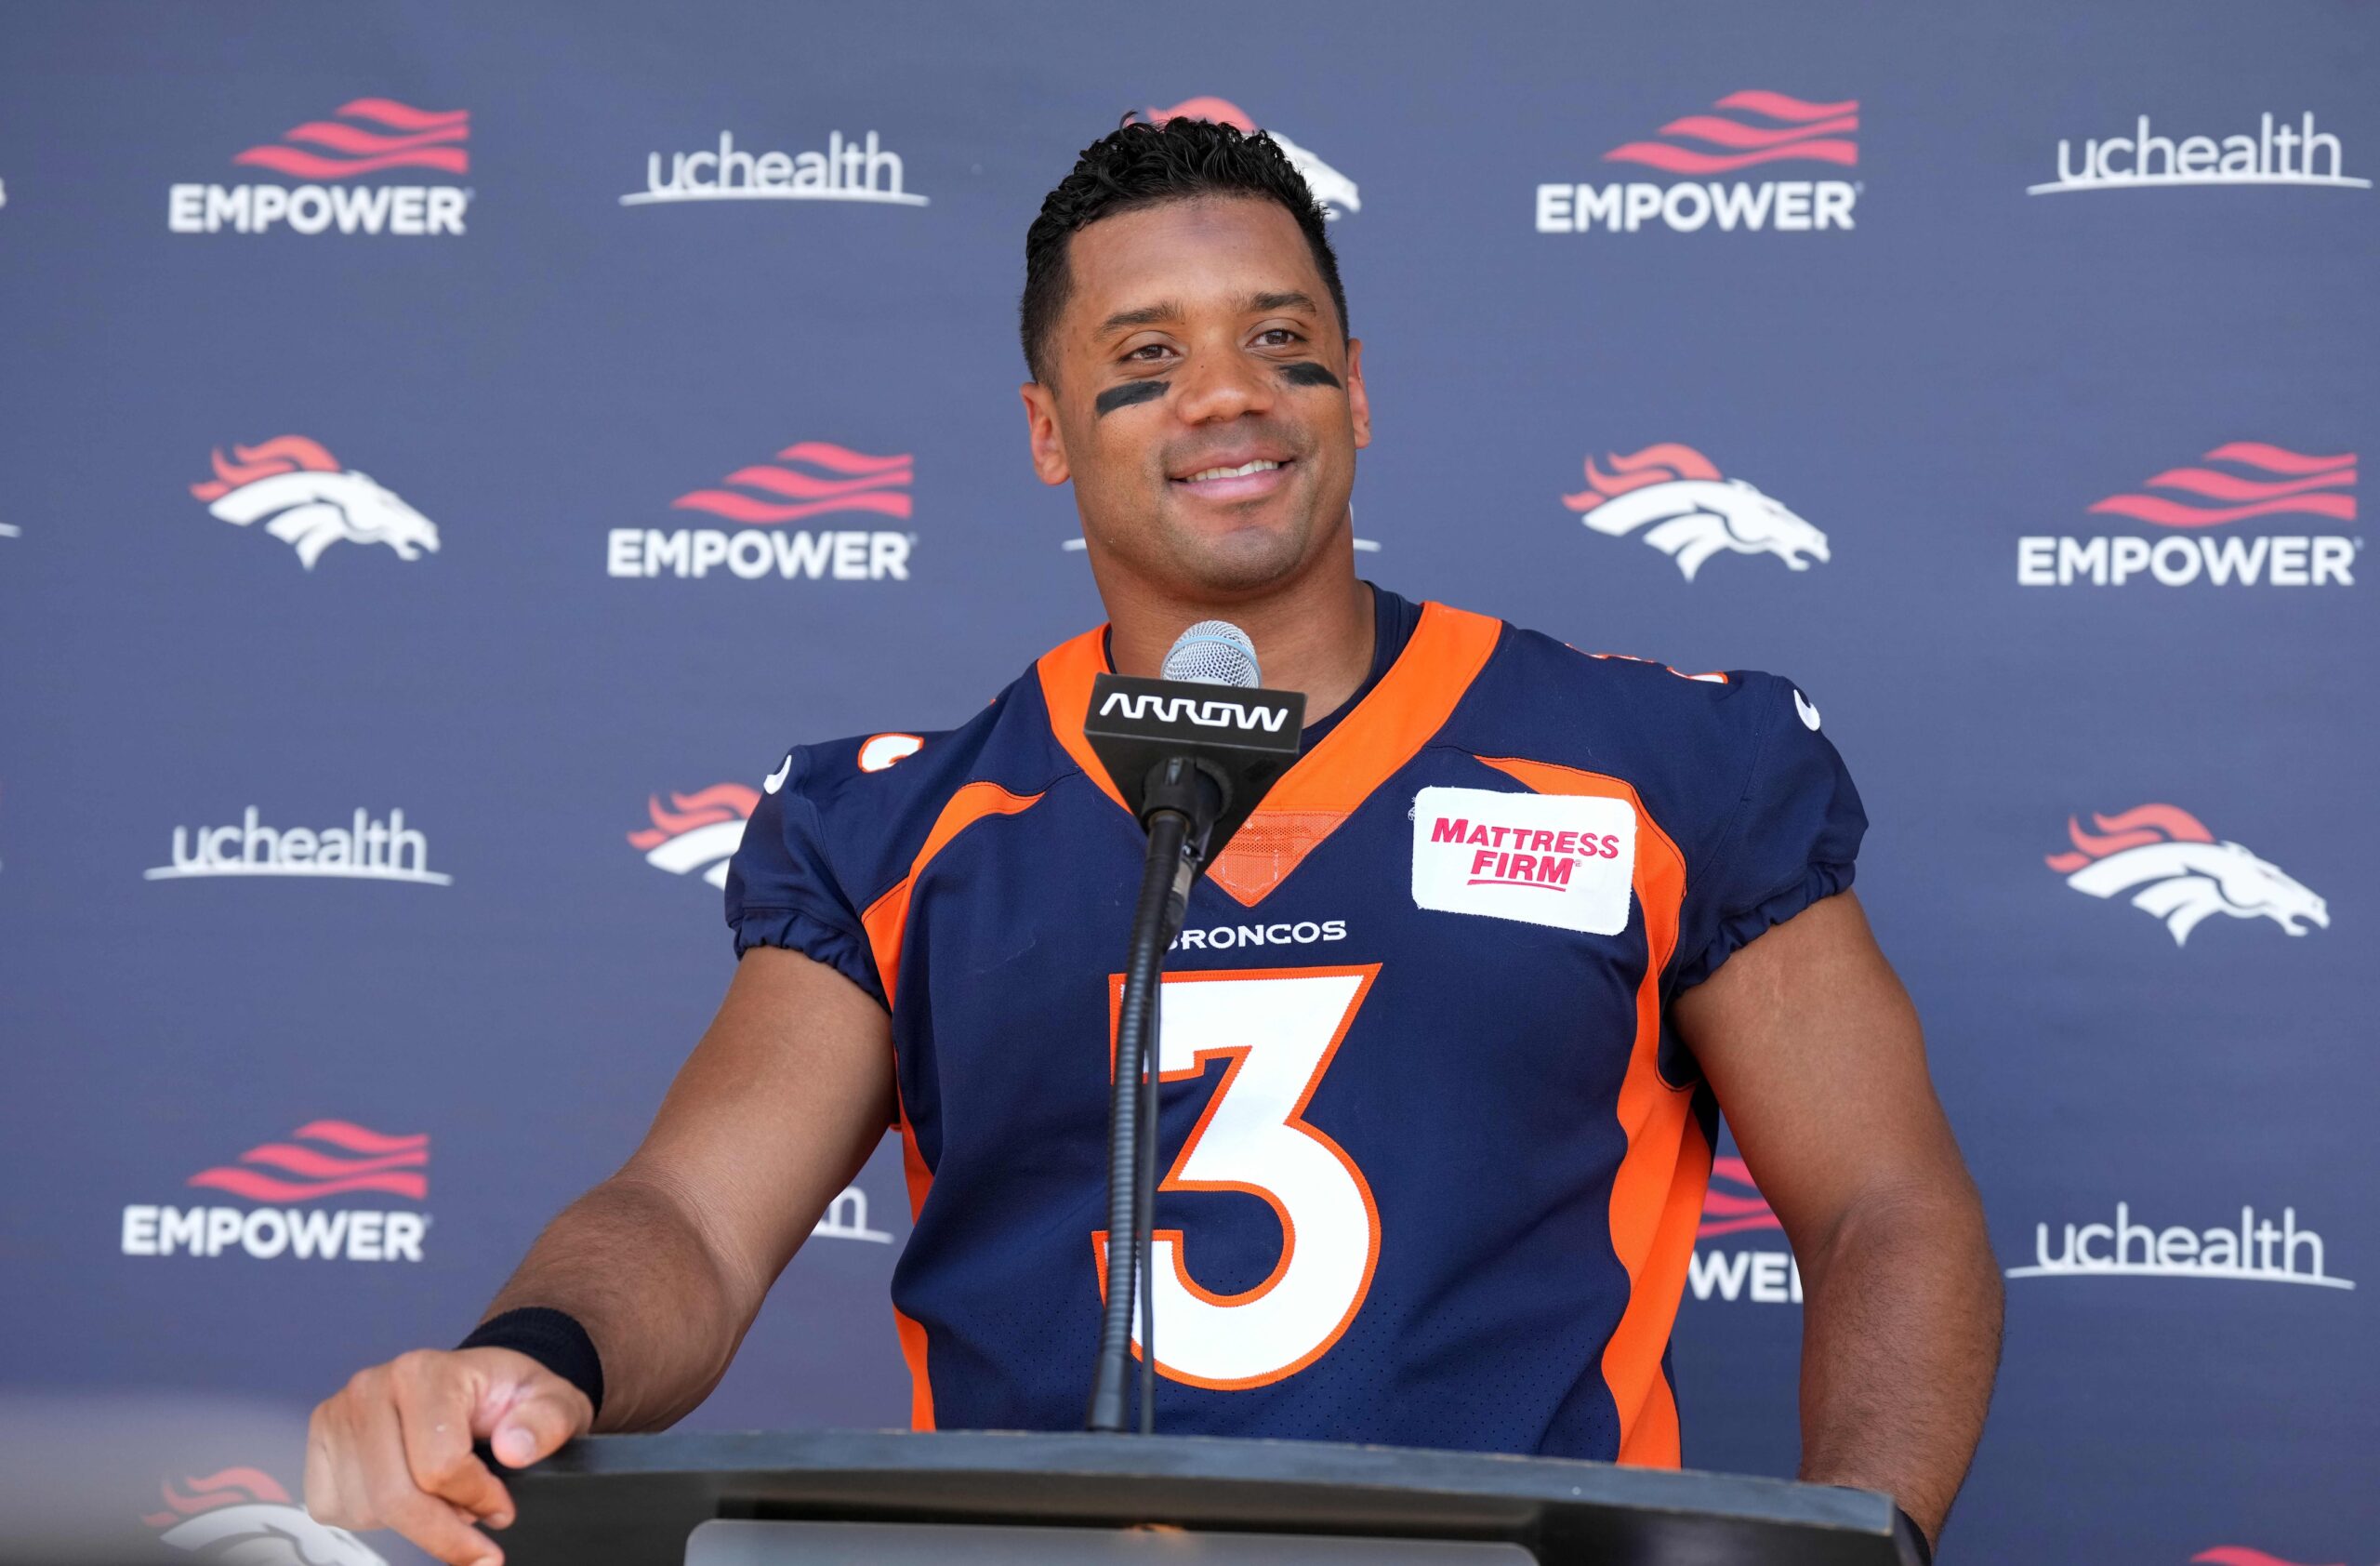 Russell Wilson's future with the Denver Broncos is uncertain